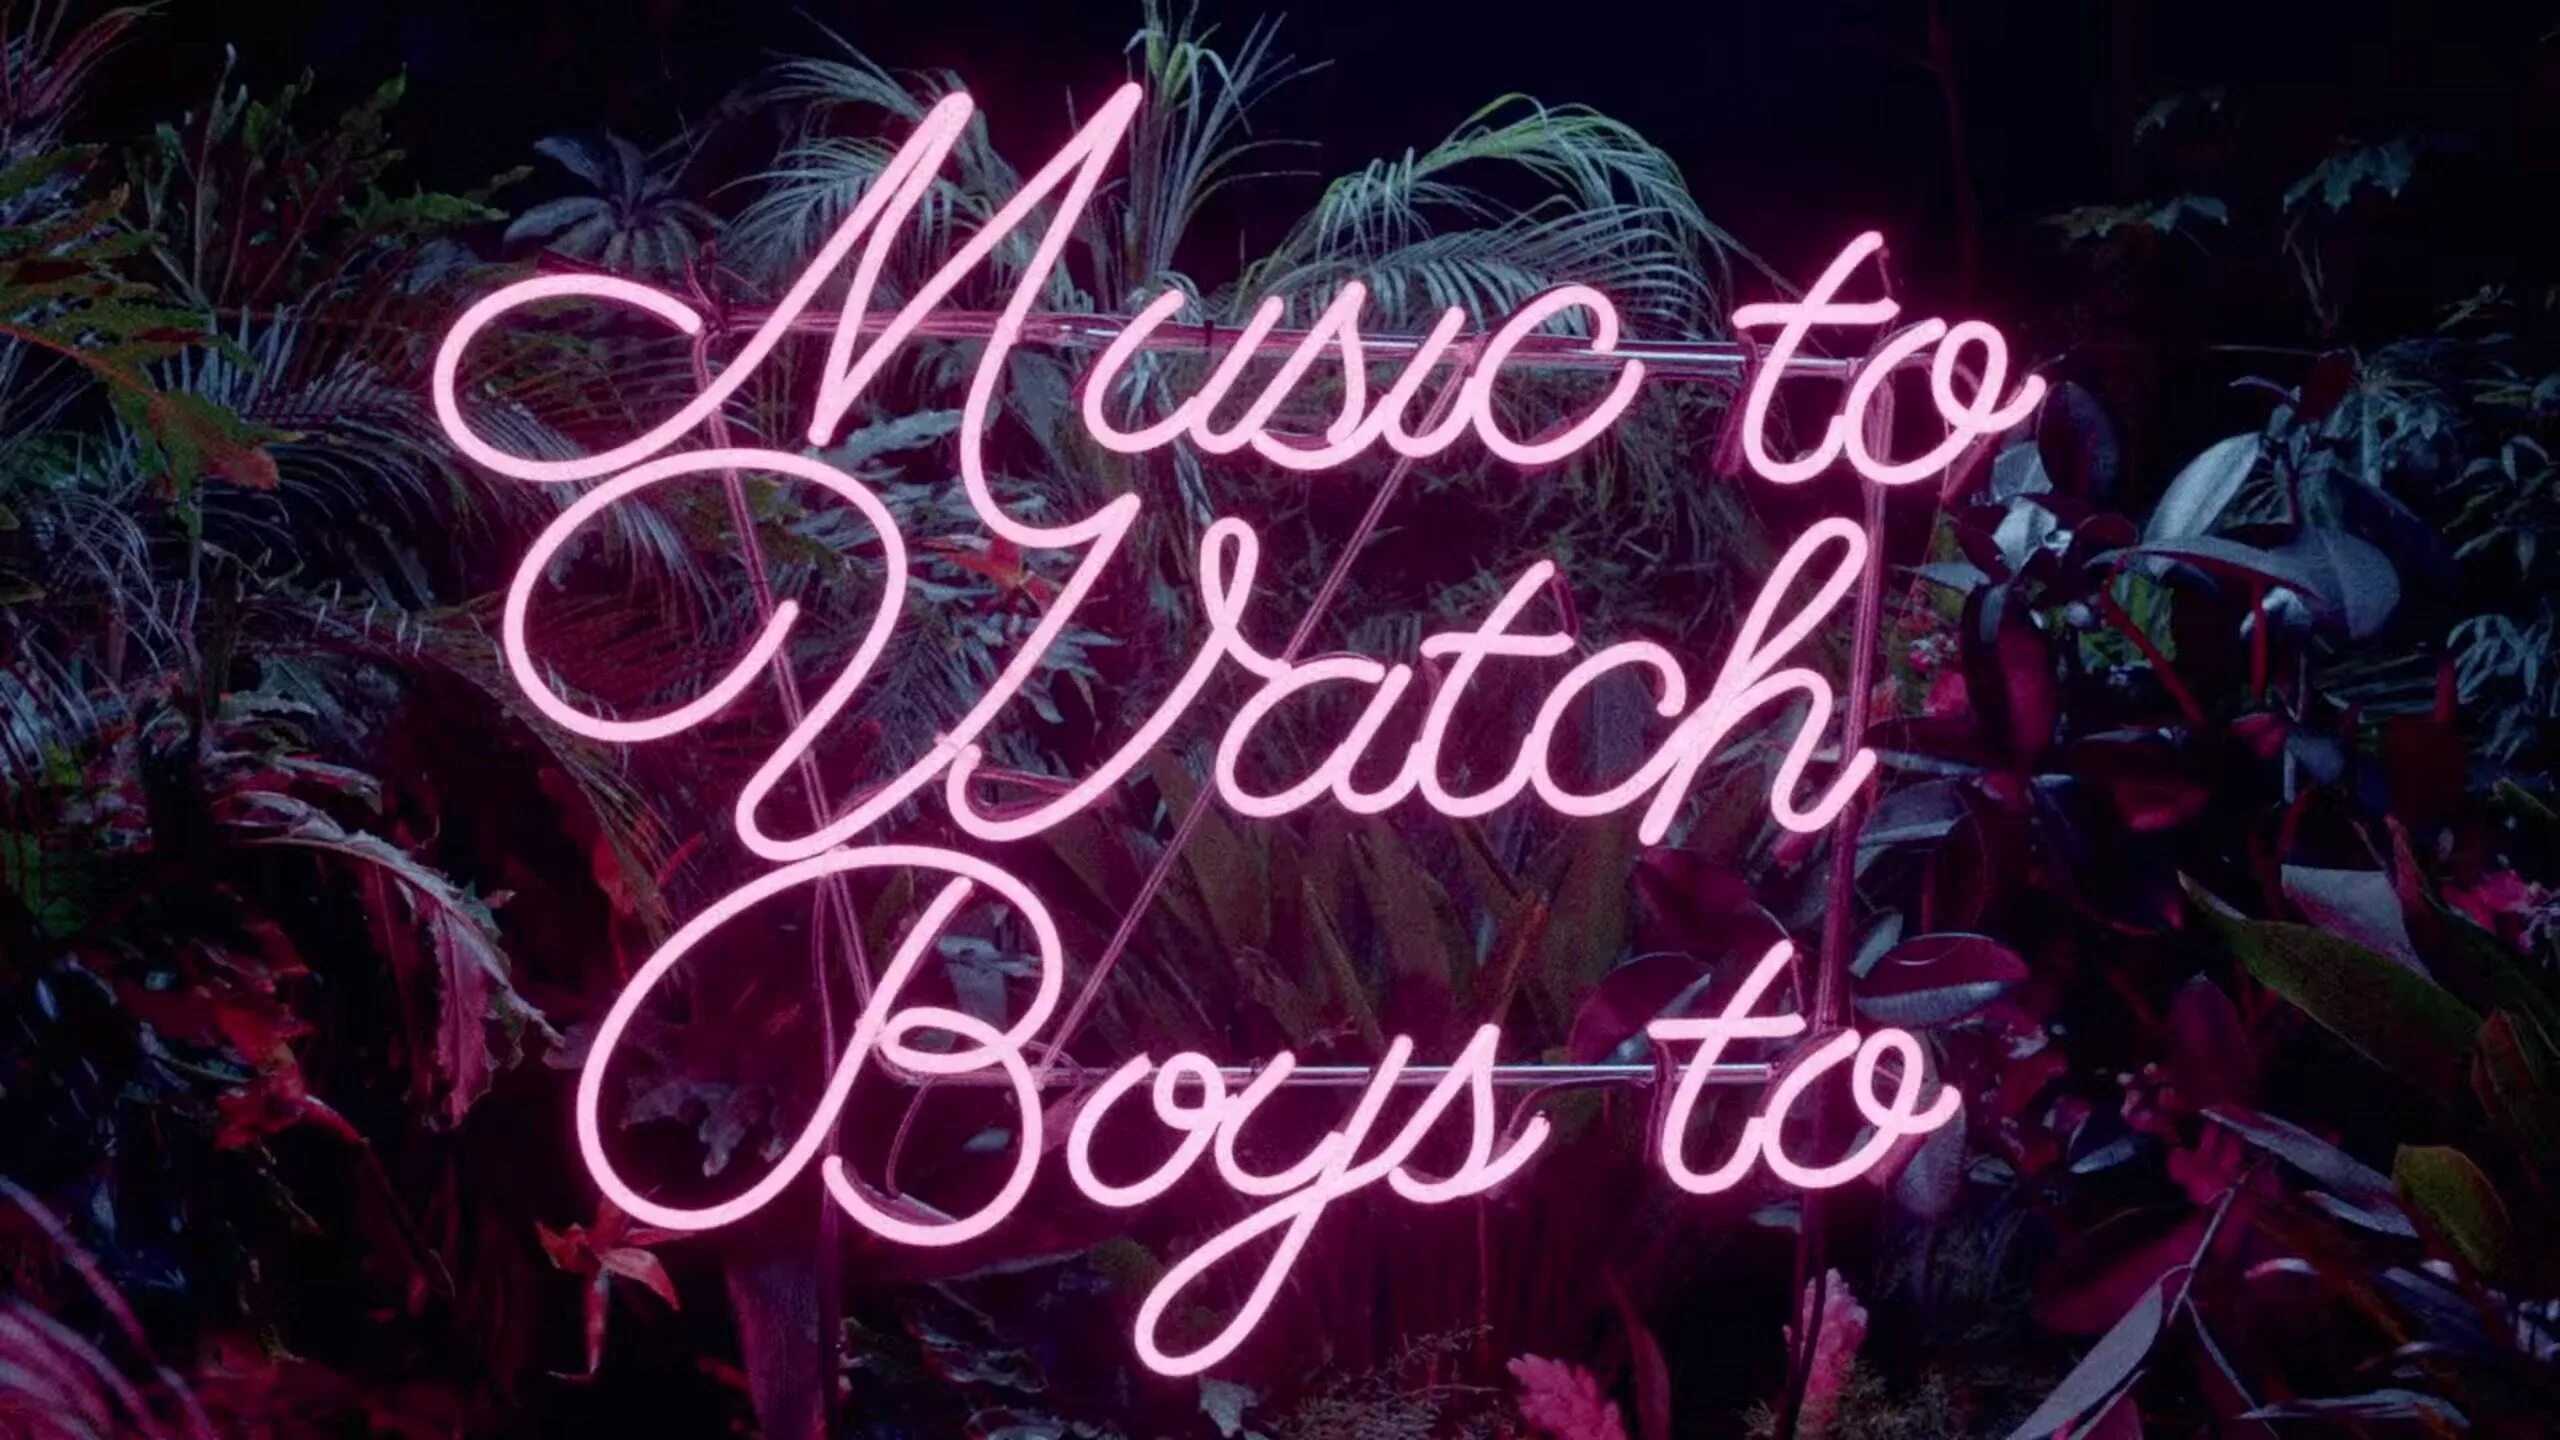 Music to watch boys to